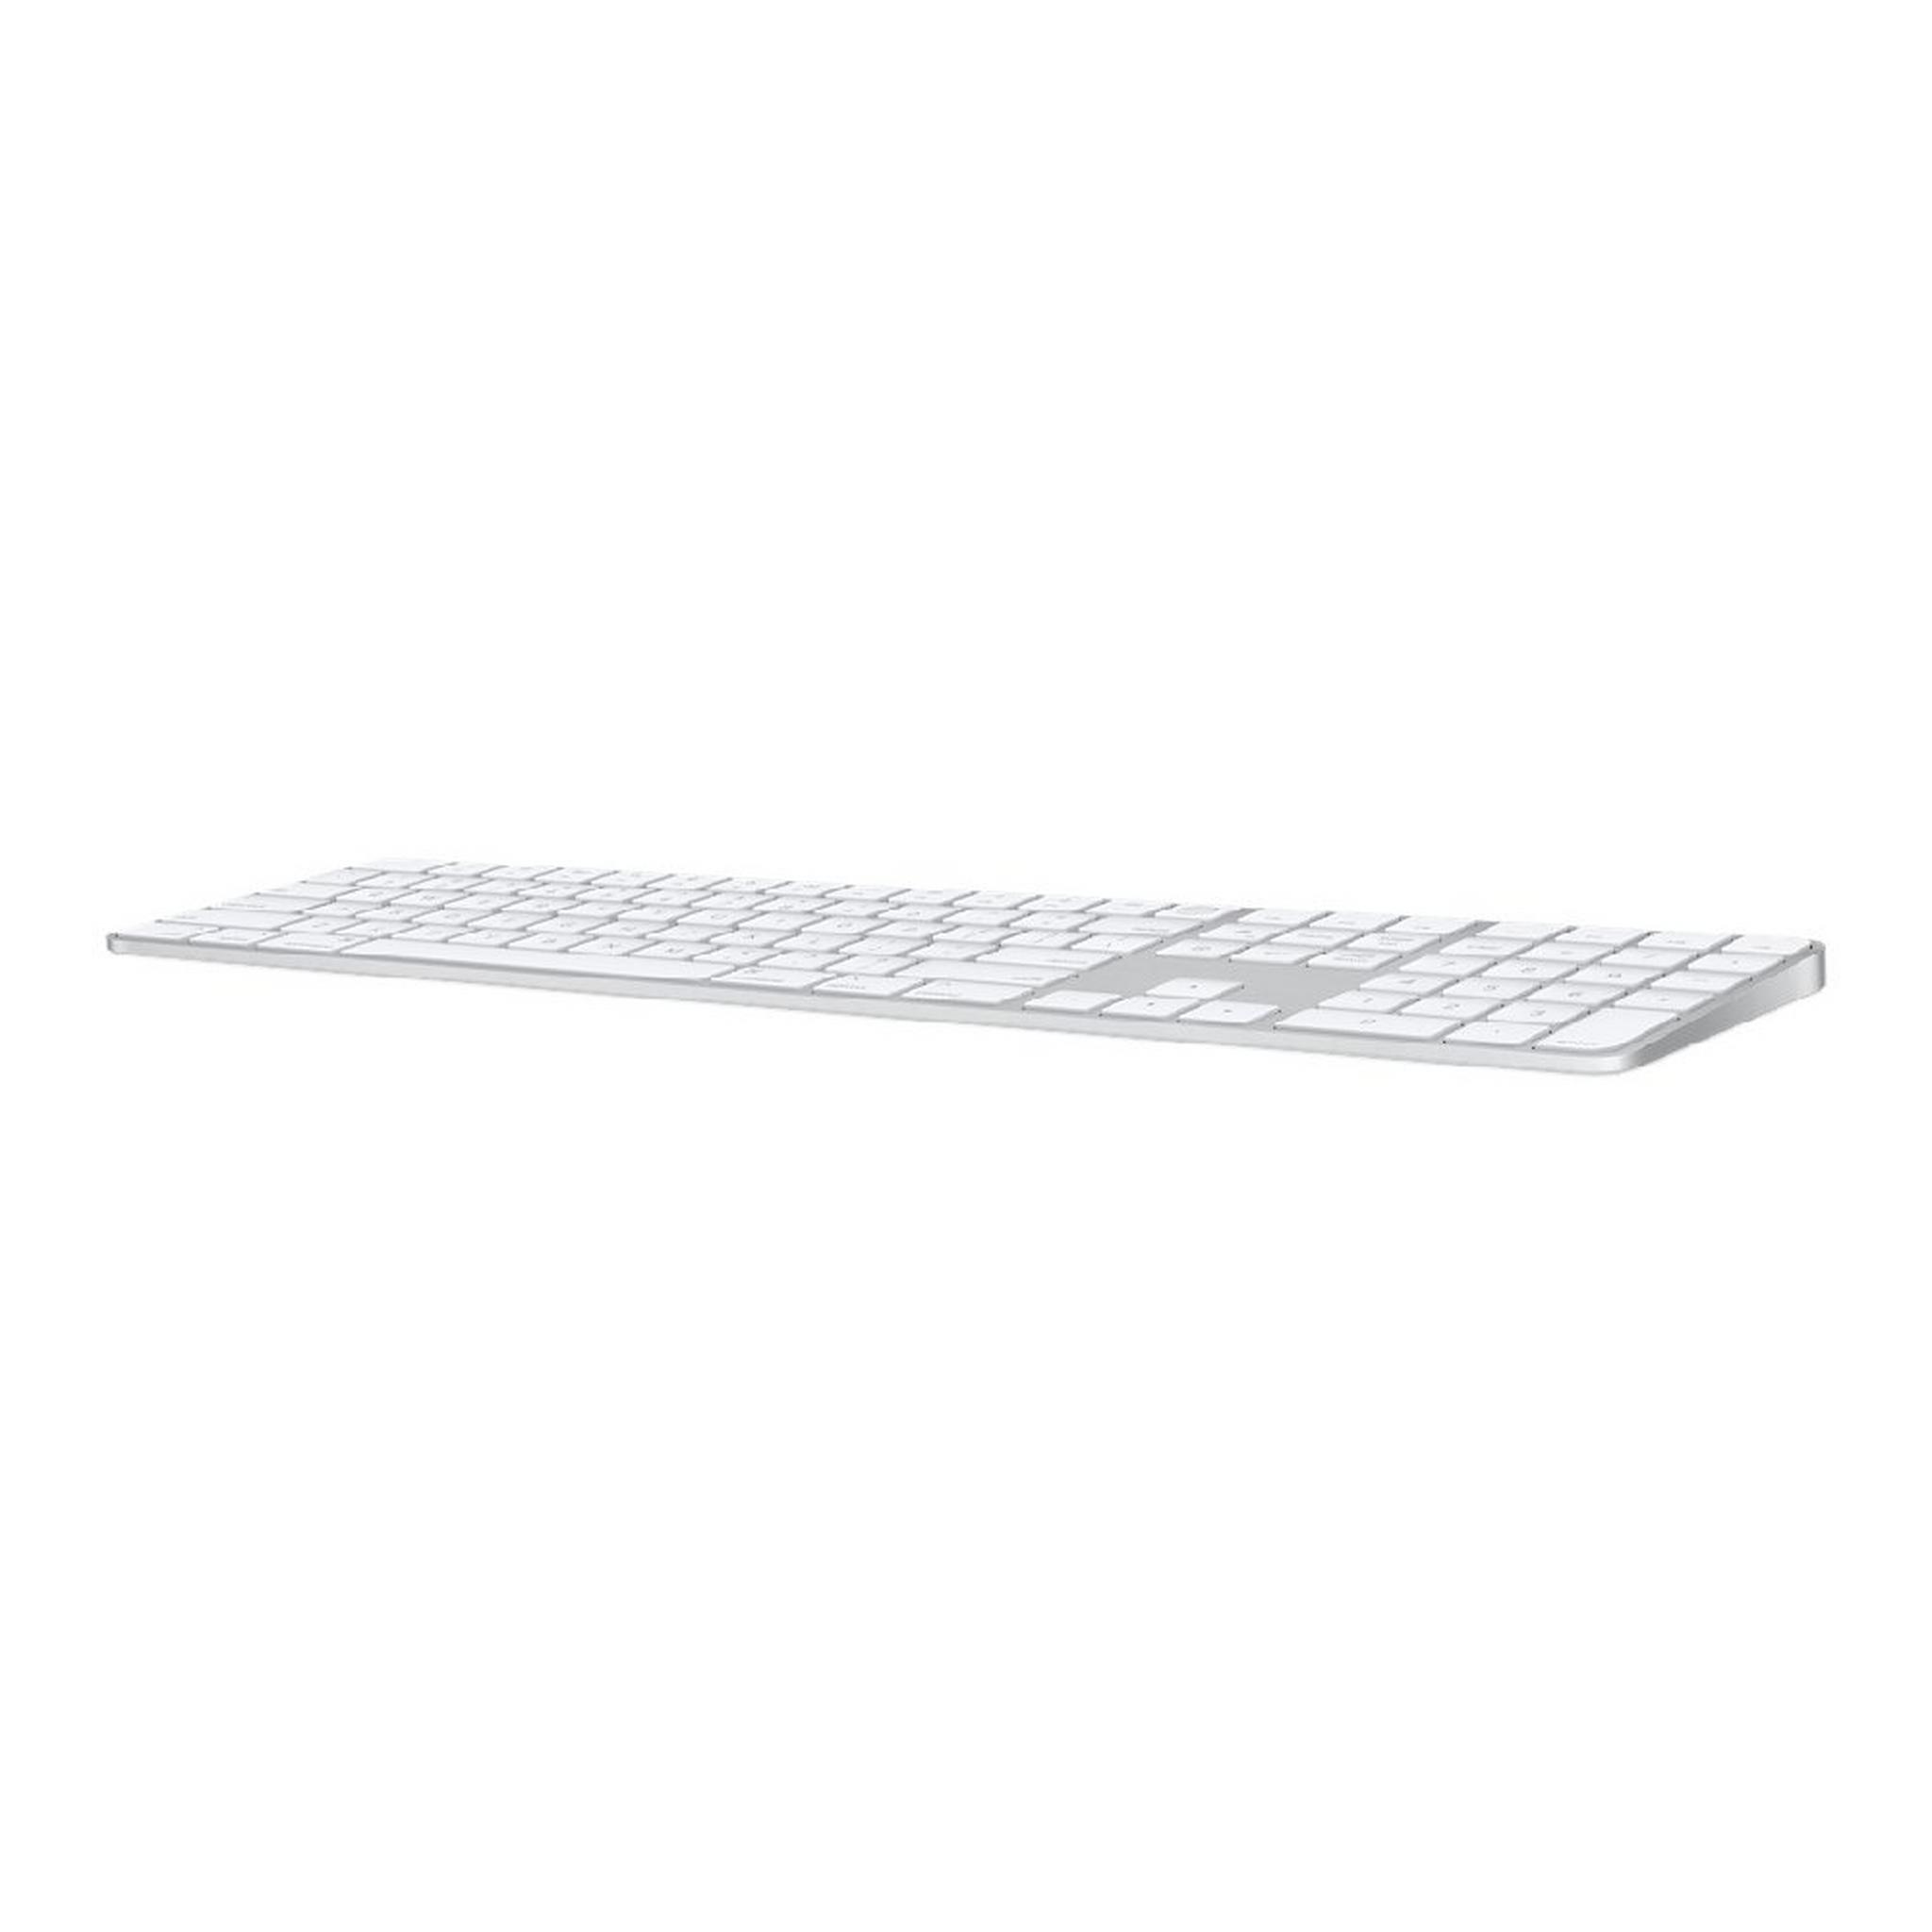 Apple Magic Keyboard with Touch ID and Numeric Keypad EN/AR - Silver